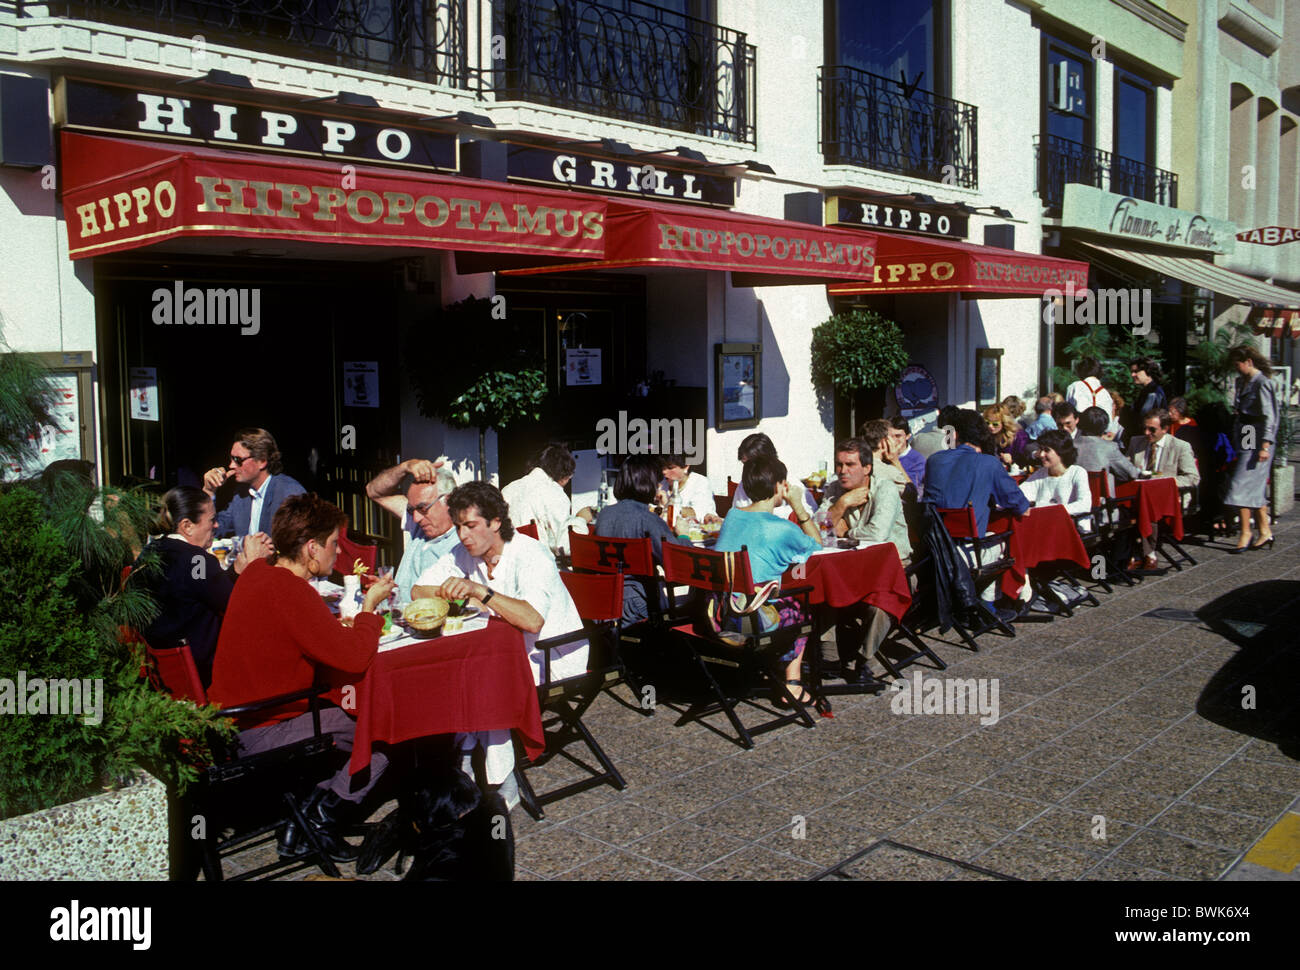 French people, tourists, eating, French food, French food and drink, French cuisine, Hippo Grill, Hippopotamus restaurant, Nice, France Stock Photo